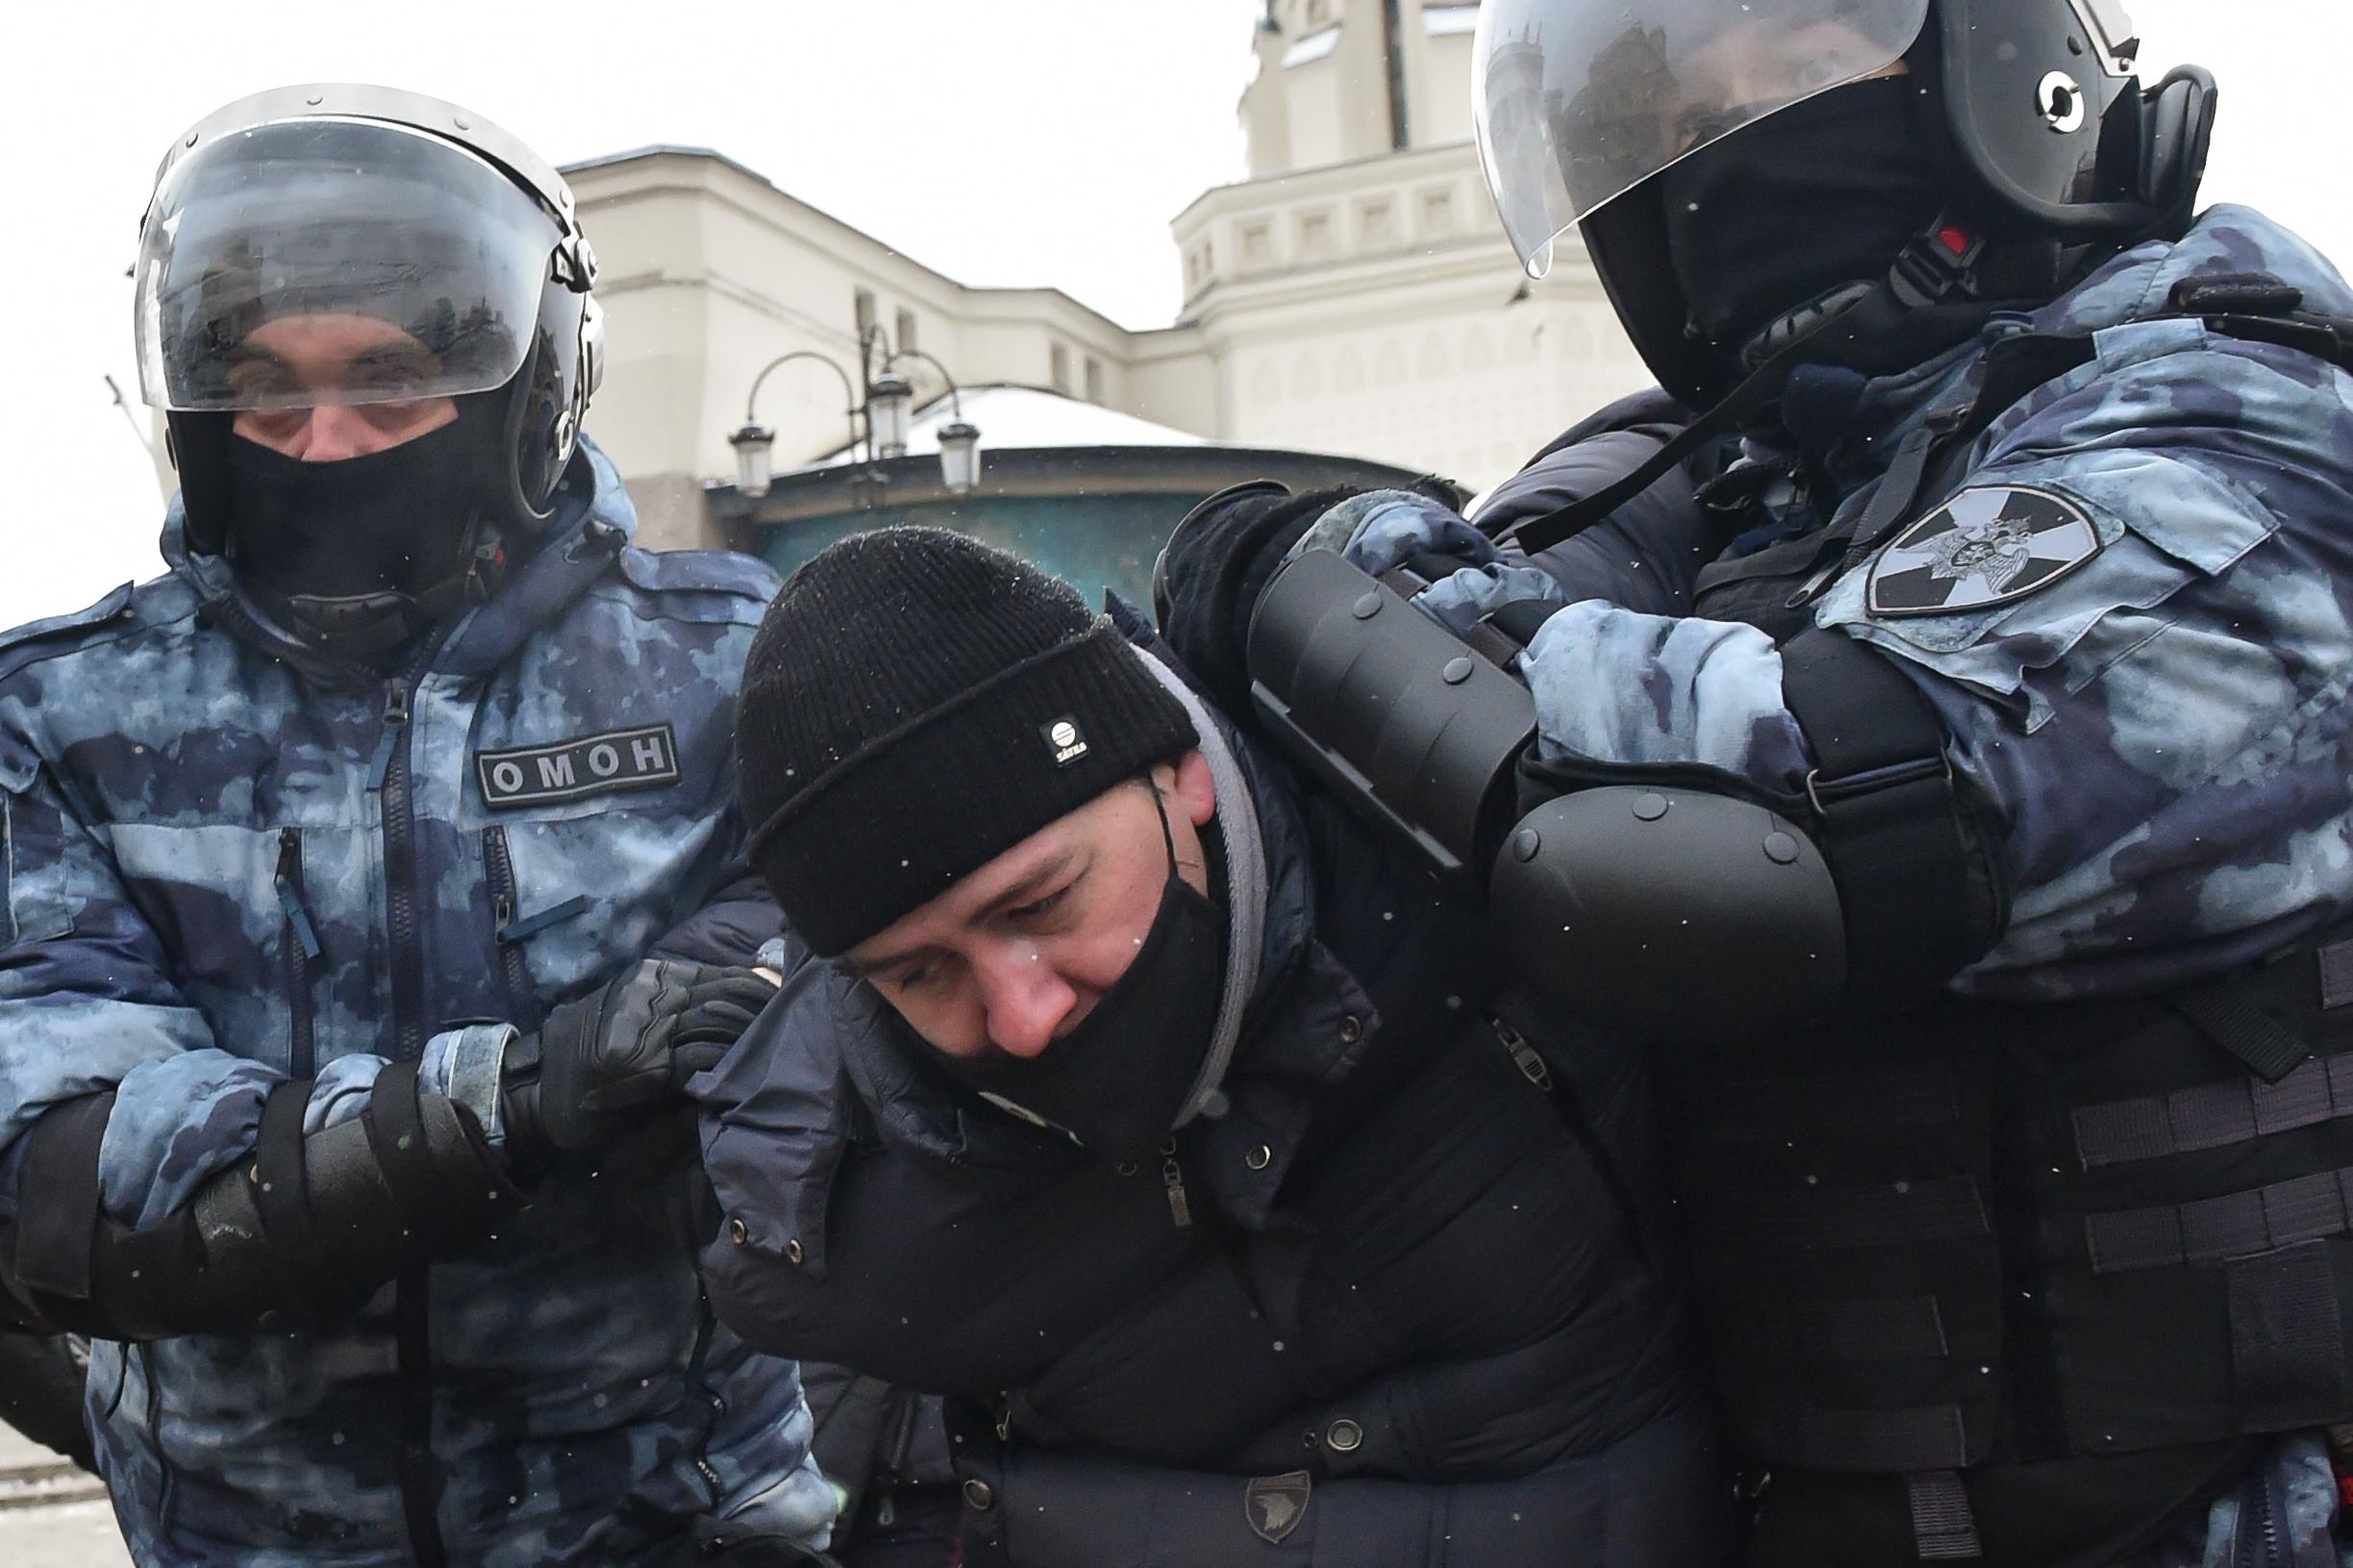 Riot police detain a man during a rally in support of jailed opposition leader Alexei Navalny in Moscow on January 31, 2021.